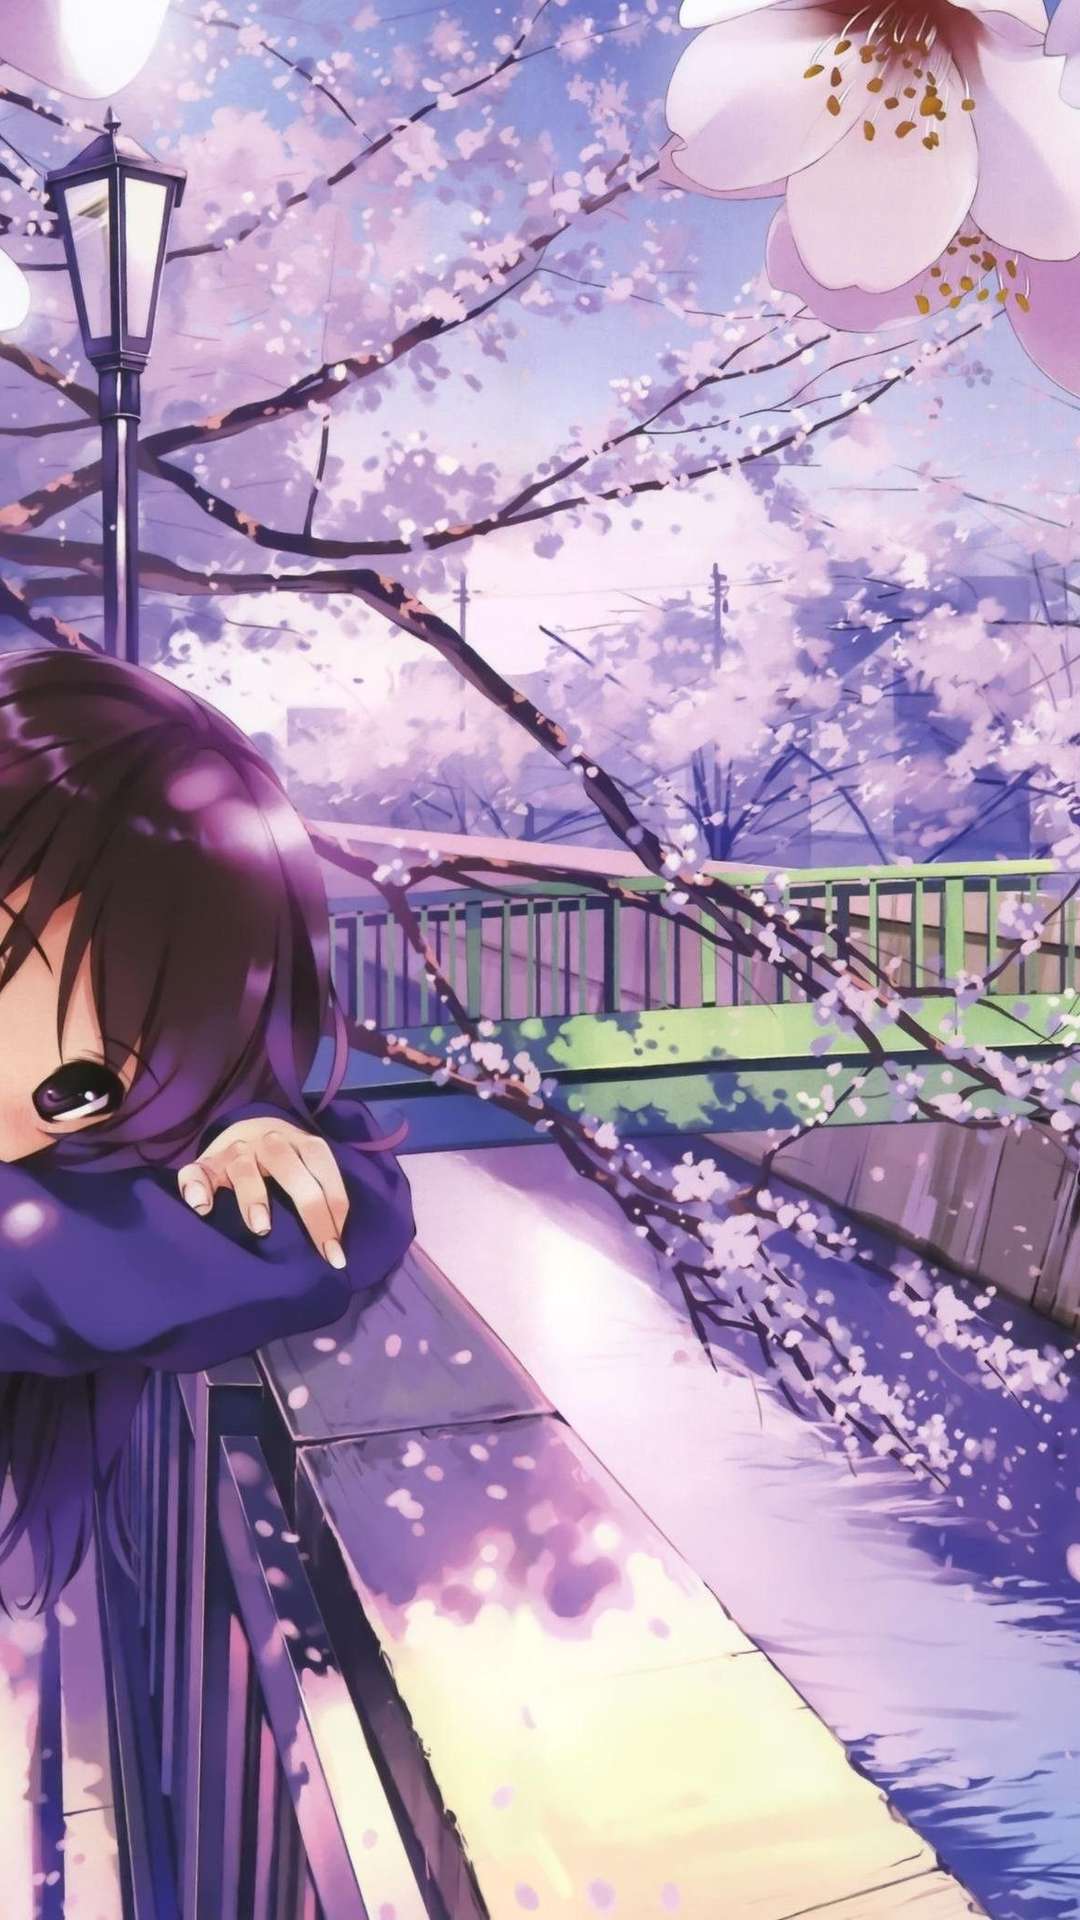 564050 1920x1080 Girl, Anime, Spring wallpaper PNG - Rare Gallery HD  Wallpapers